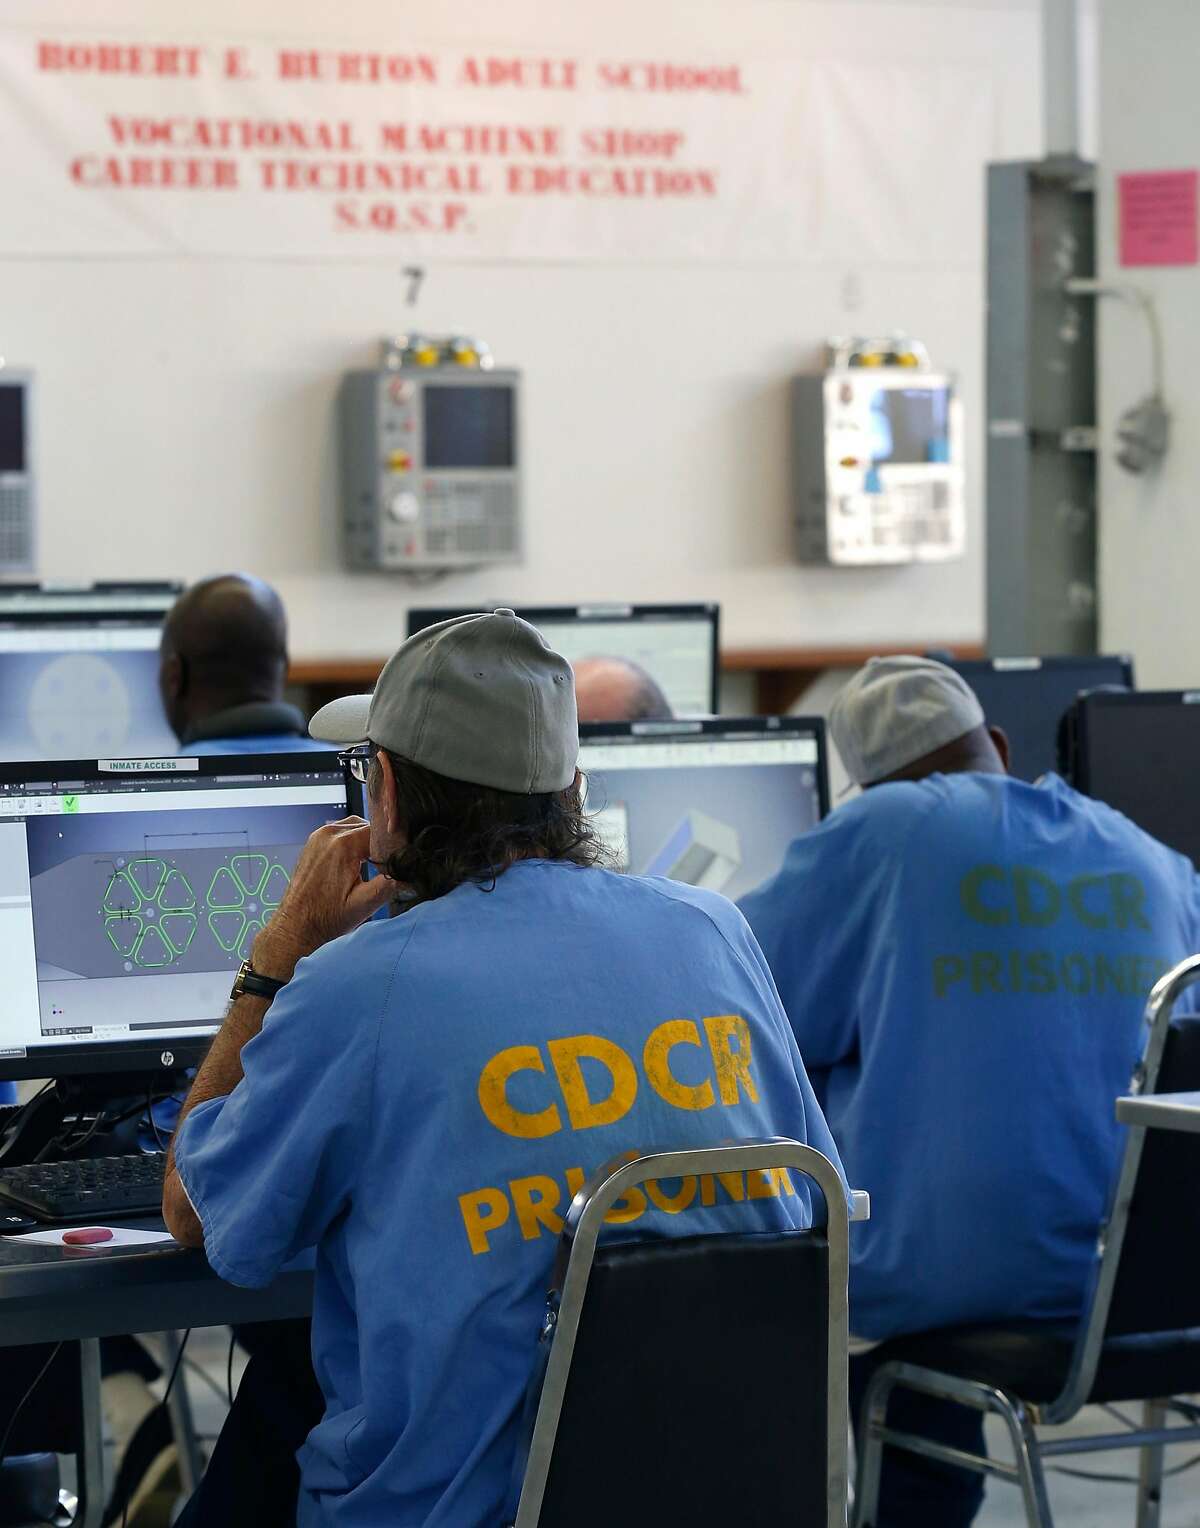 Inmate students use computers in a vocational machine shop class of the Robert E. Burton Adult School at San Quentin State Prison in San Quentin, Calif. on Thursday, Sept. 12, 2019. Burton has been designated as a "distinguished school," the first school within the California corrections system to achieve the honor.